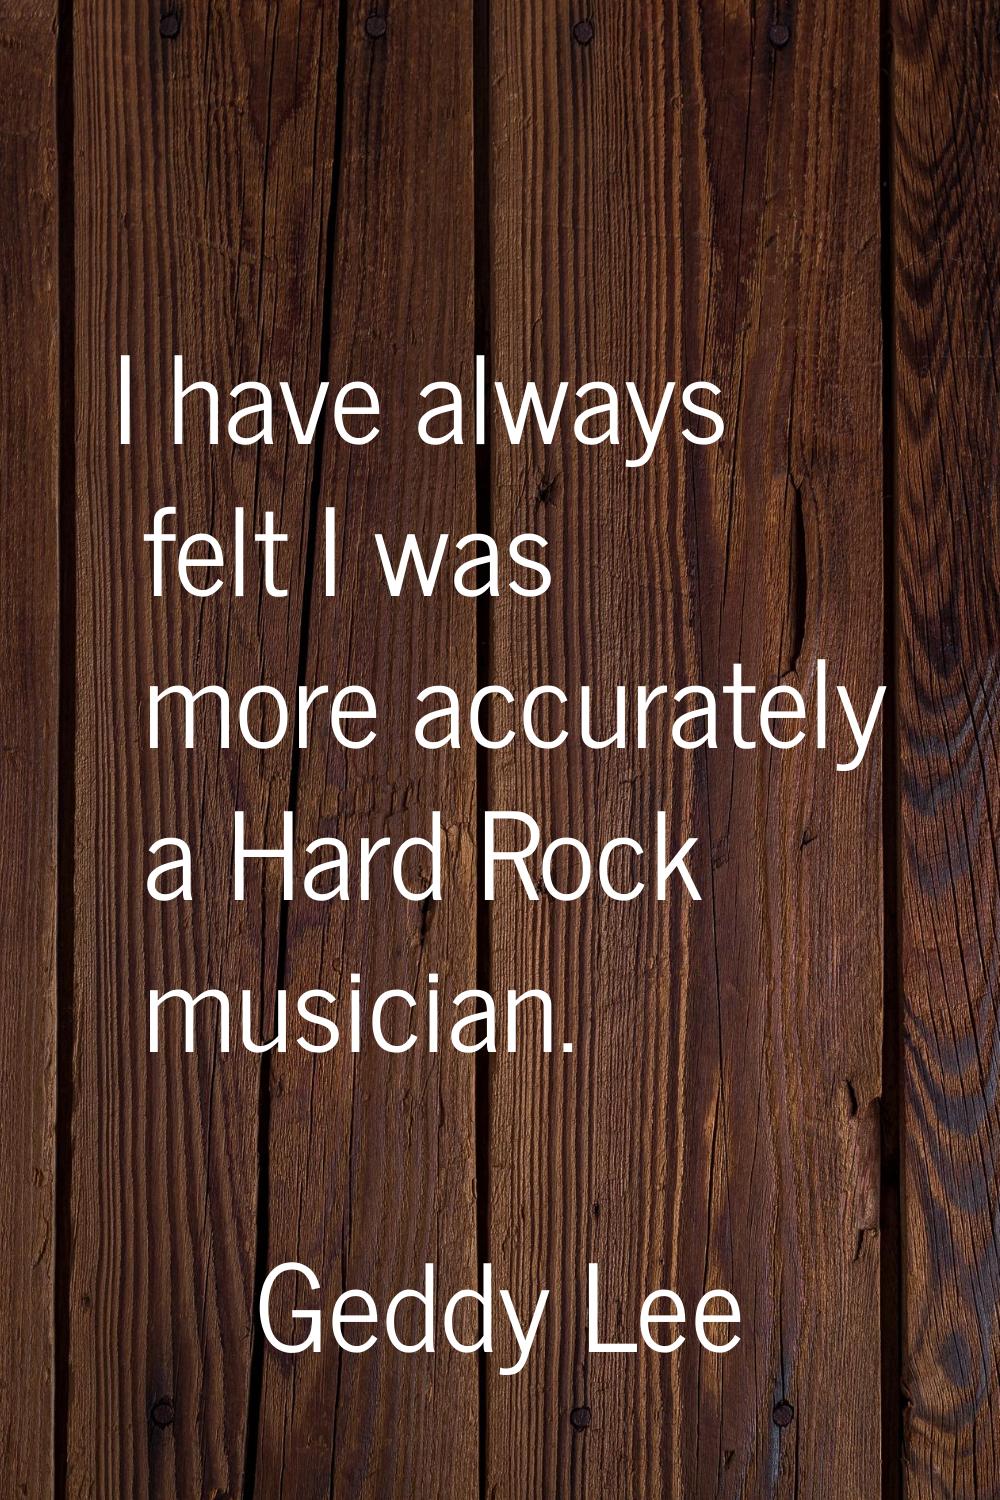 I have always felt I was more accurately a Hard Rock musician.